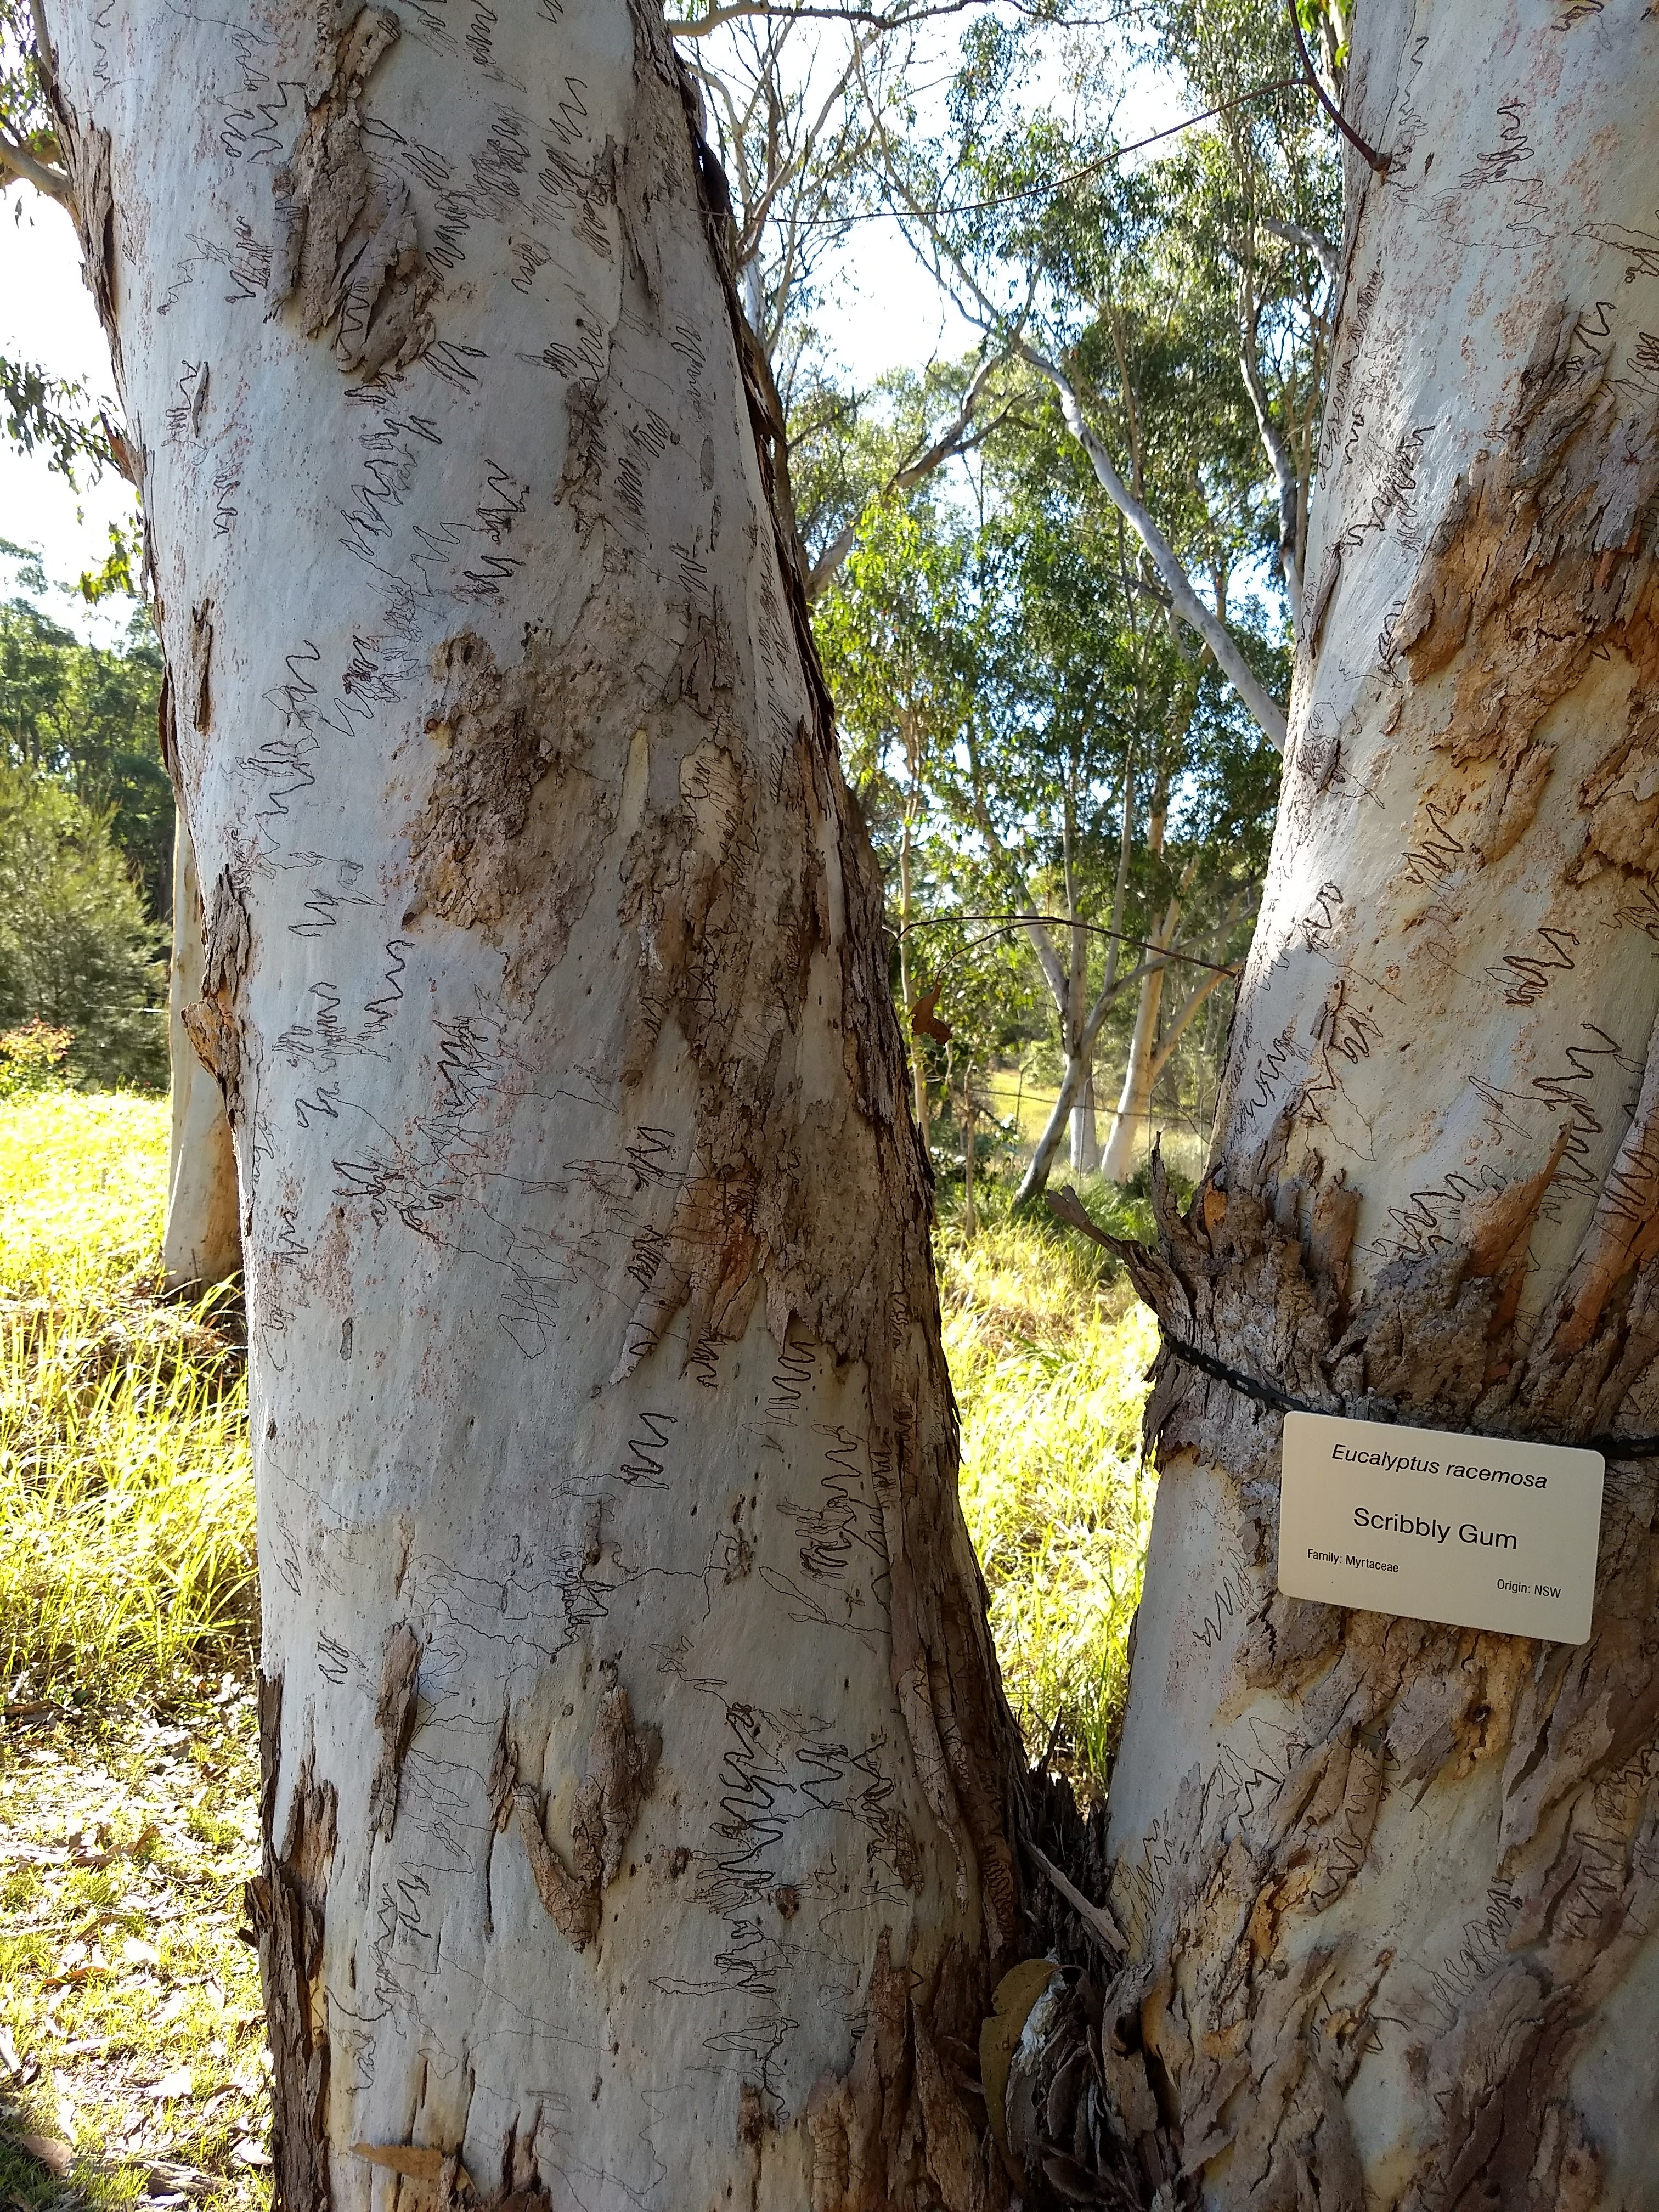 A "scribbly"" gum tree